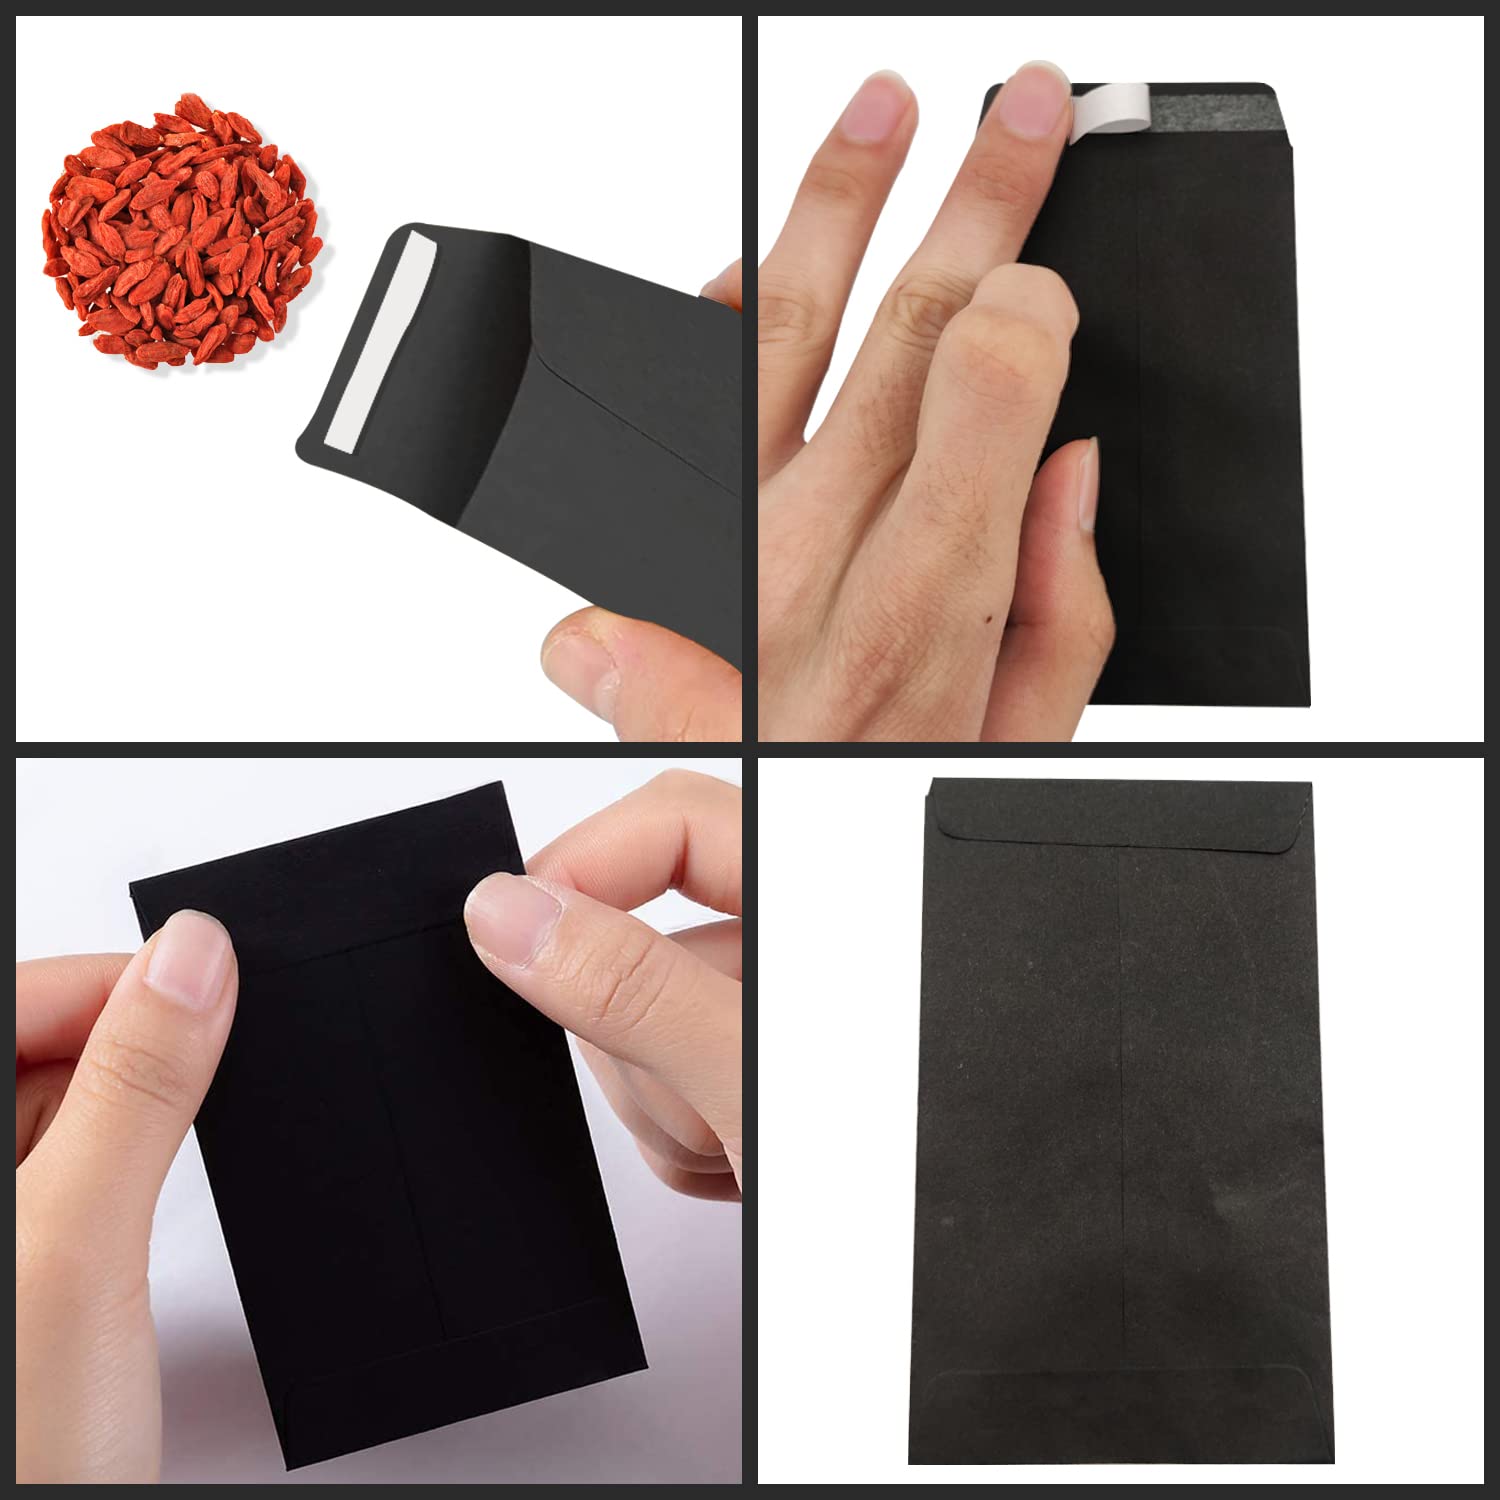 100Pcs Small Black Envelopes, Self-Adhesive Seed Envelopes Seed Packets Kraft Paper Coin Envelopes Money Envelopes for Wages, Seeds, Coins, Beads or Stamps(10x6cm/3.9x2.4inch)